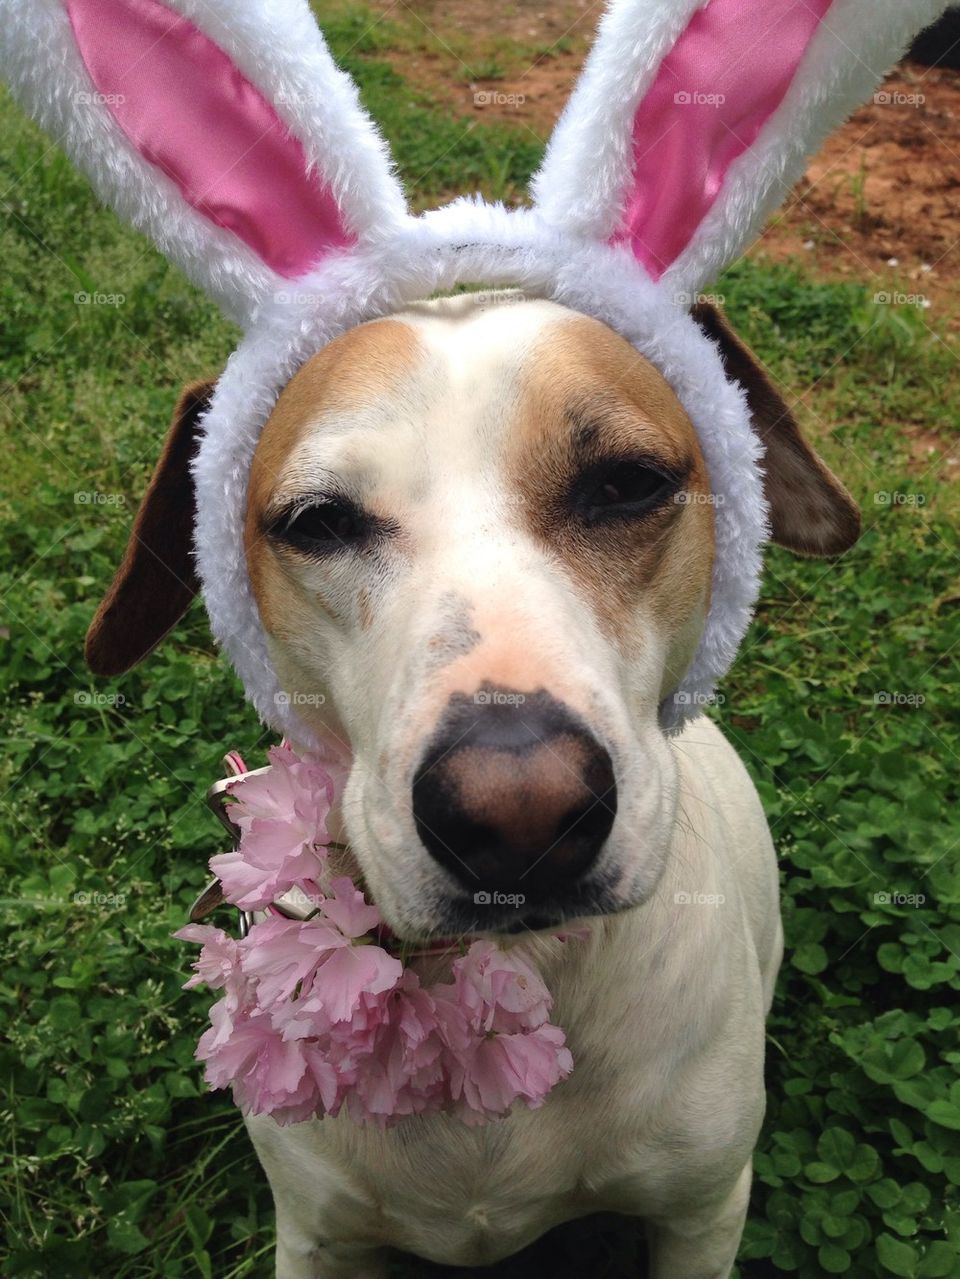 Snoopy Easter beagle 